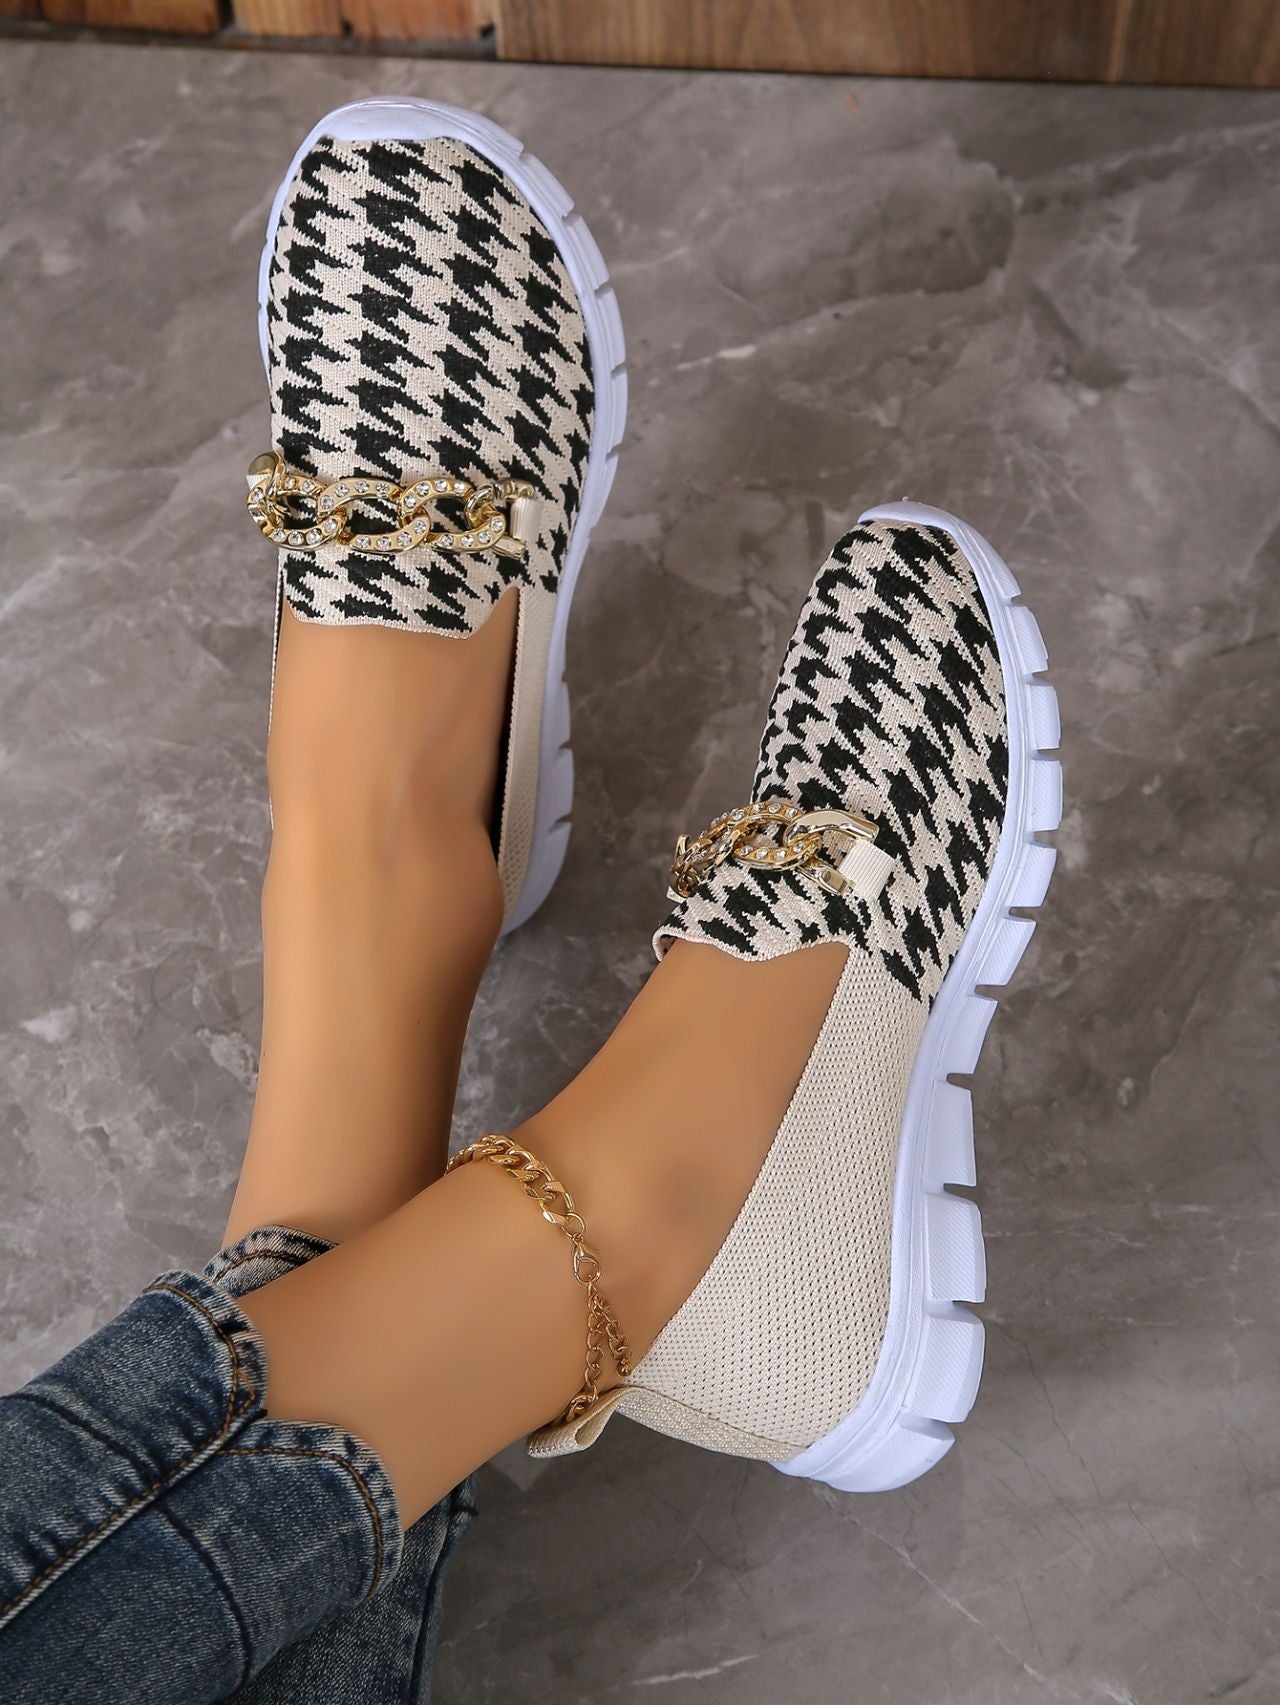 Fashionable white houndstooth sneakers - MAYISAD